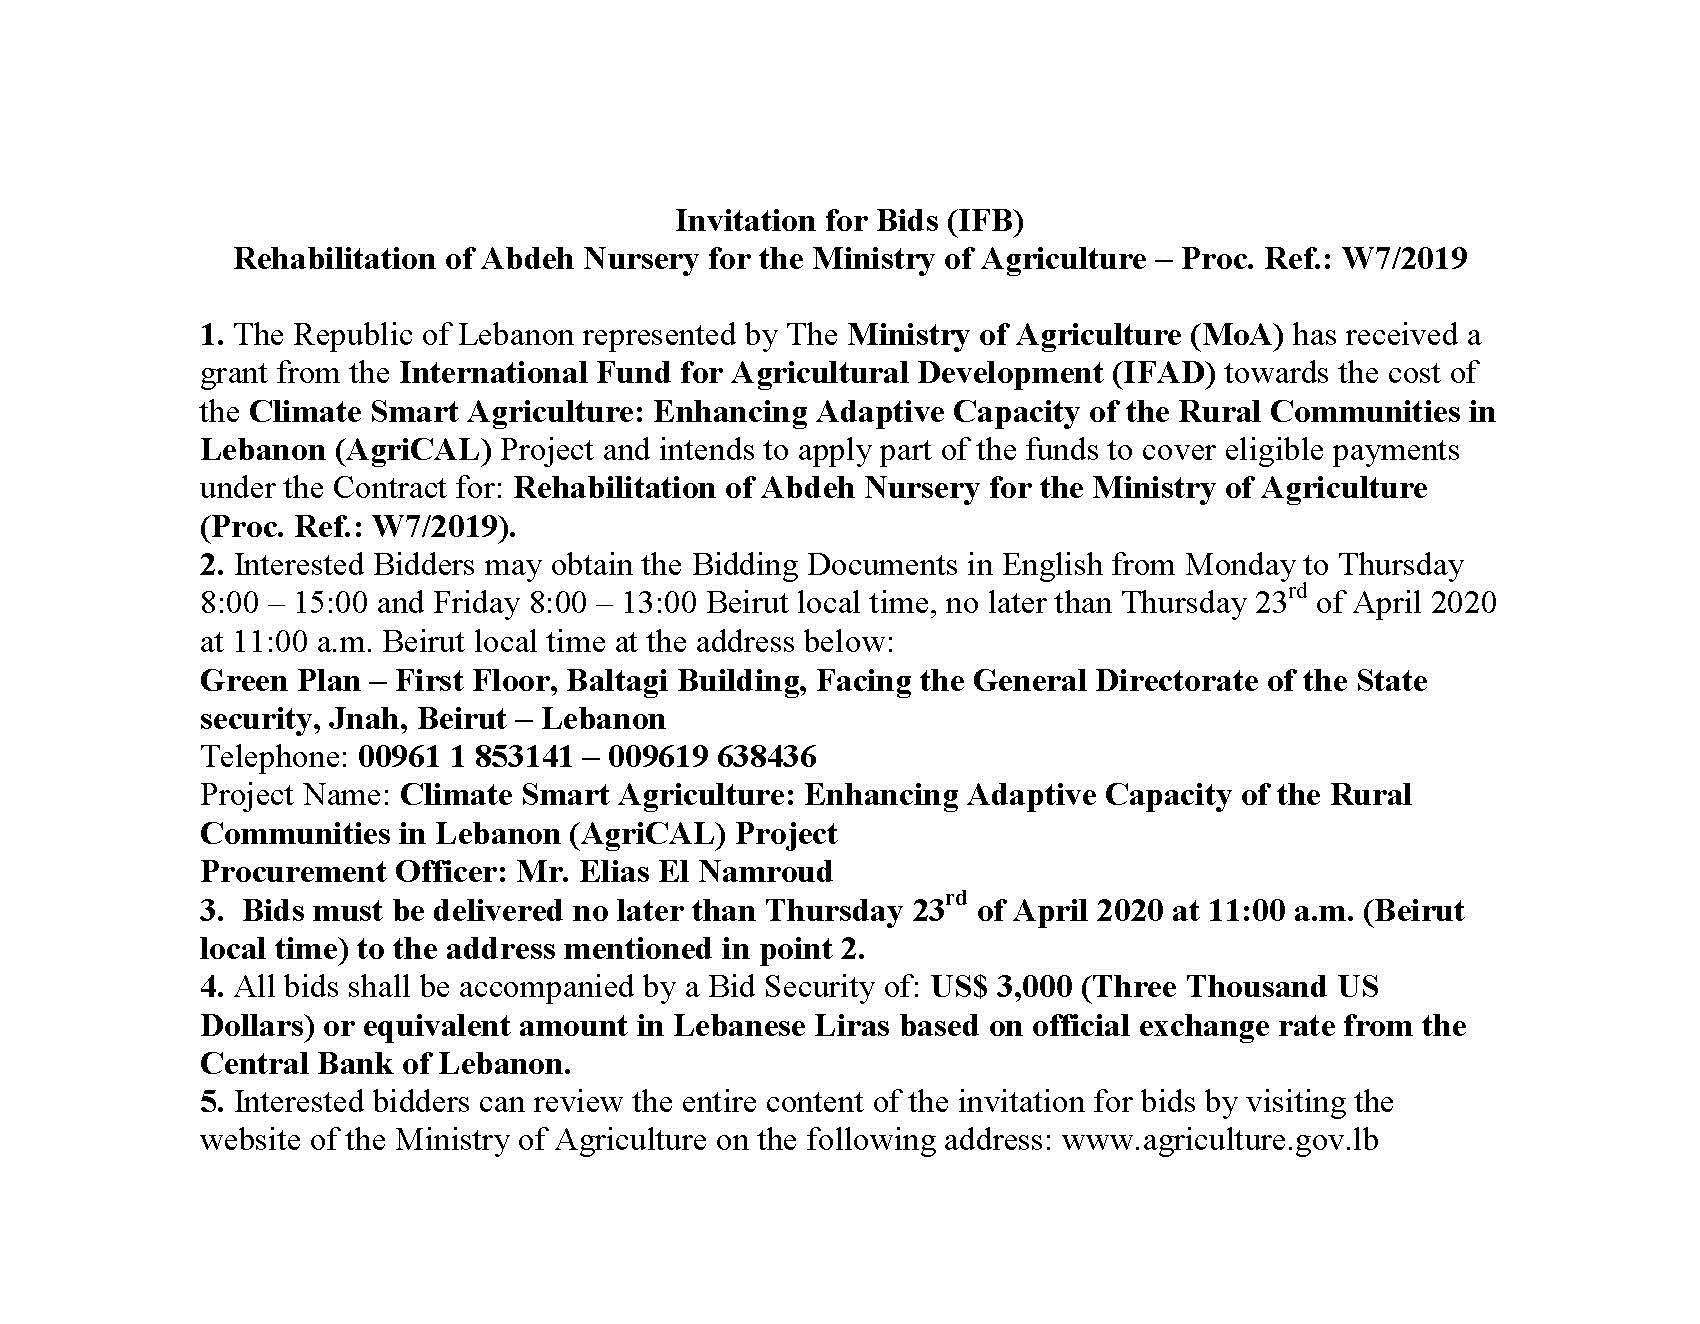 Invitation for Bids (IFB) - Rehabilitation of Abdeh Nursery for the Ministry of Agriculture – Proc. Ref.: W7/2019